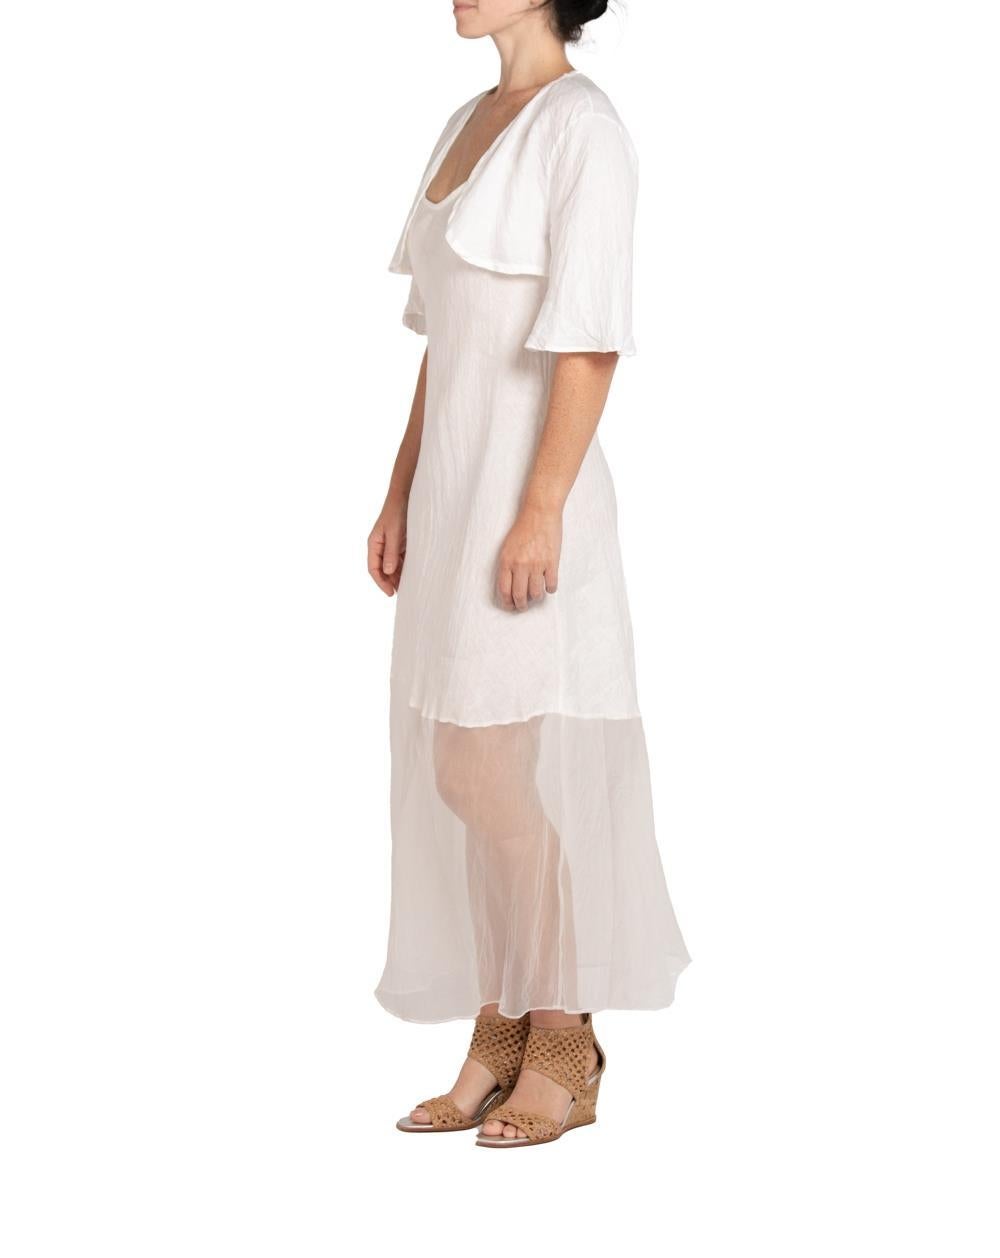 MORPHEW COLLECTION White Linen Bias Cut Dress With Jacket In Excellent Condition For Sale In New York, NY